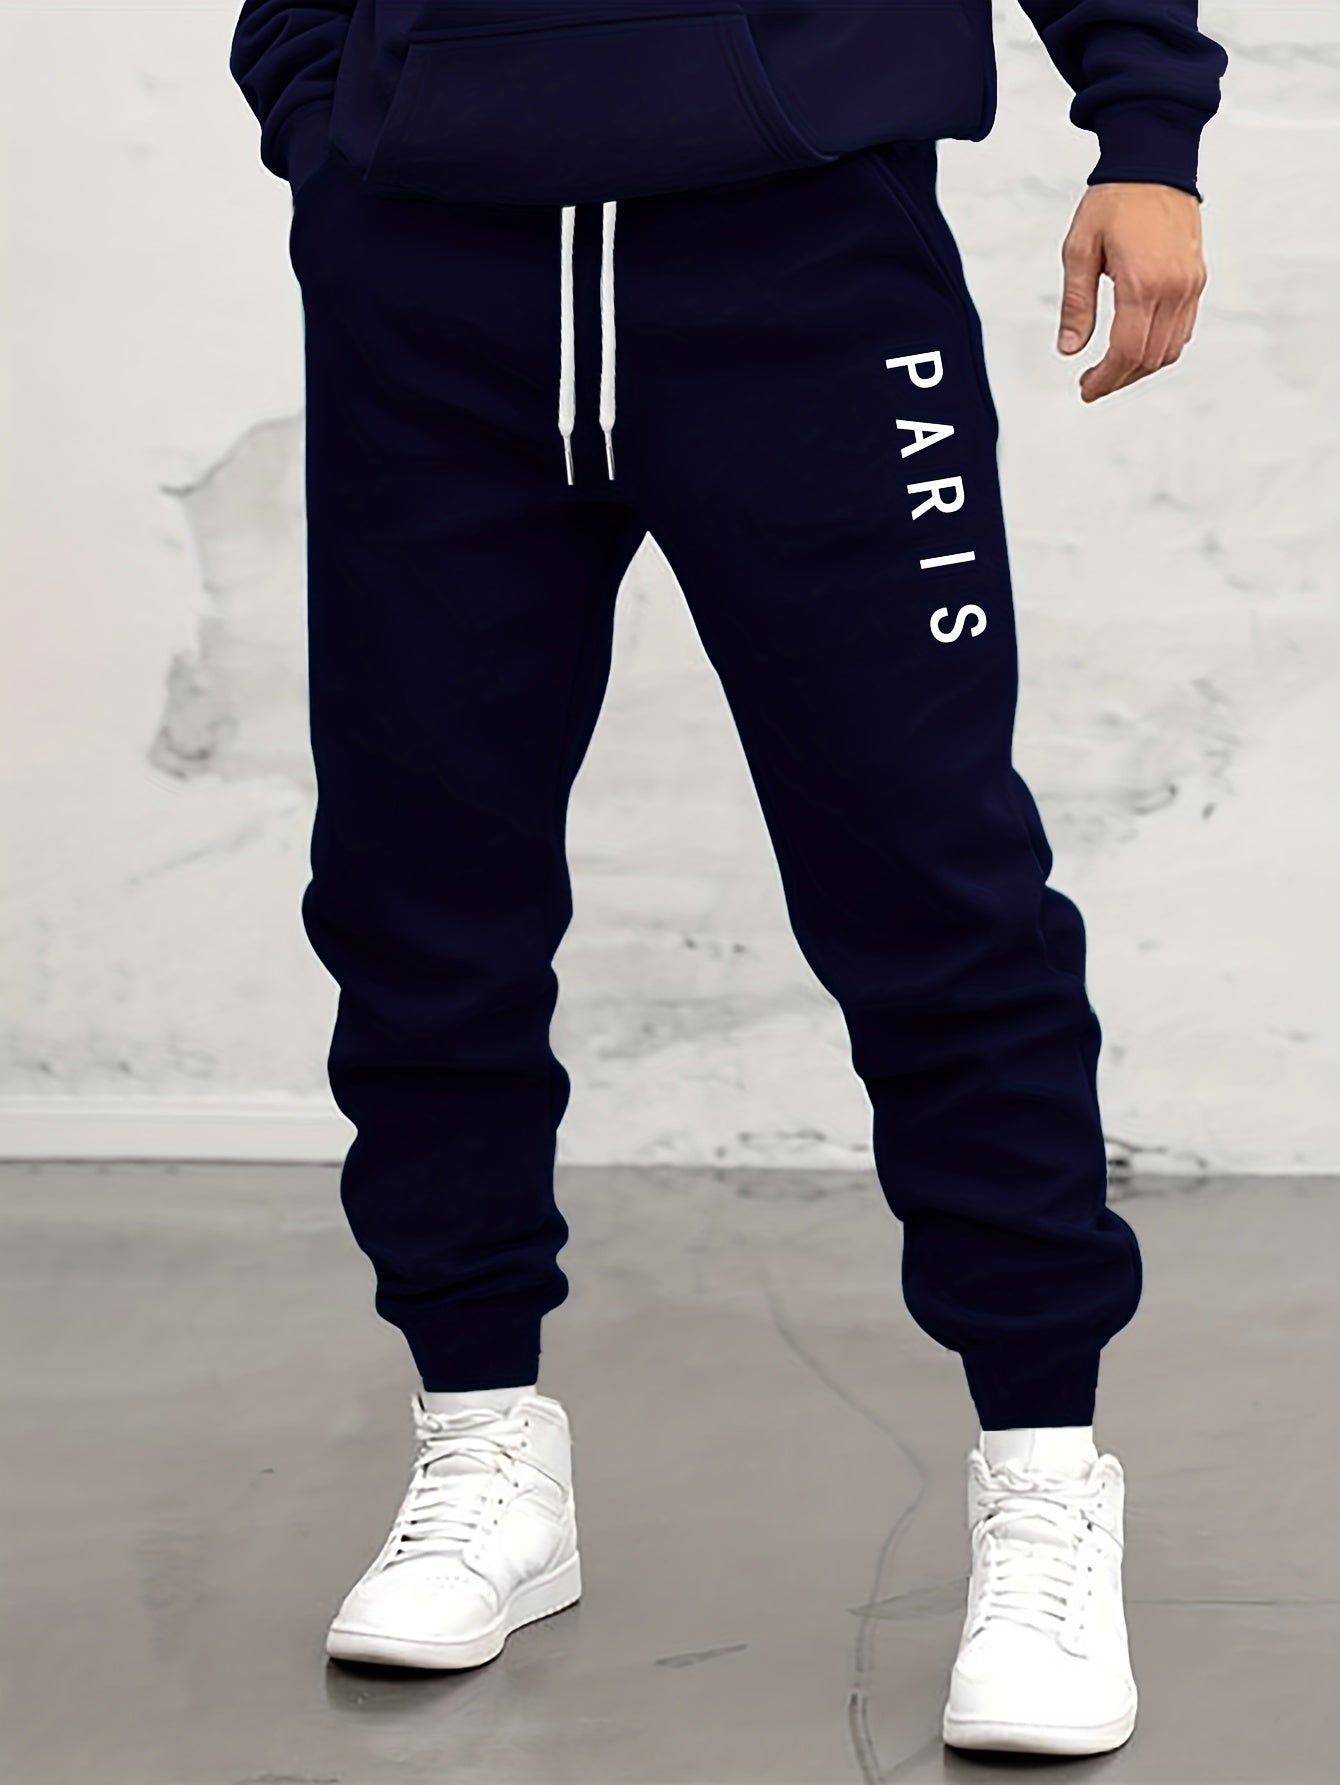 Wing / PARIS Print Drawstring Sweatpants Loose Fit Pants Men's Casual Slightly Stretch Joggers For Spring Autumn Running Jogging